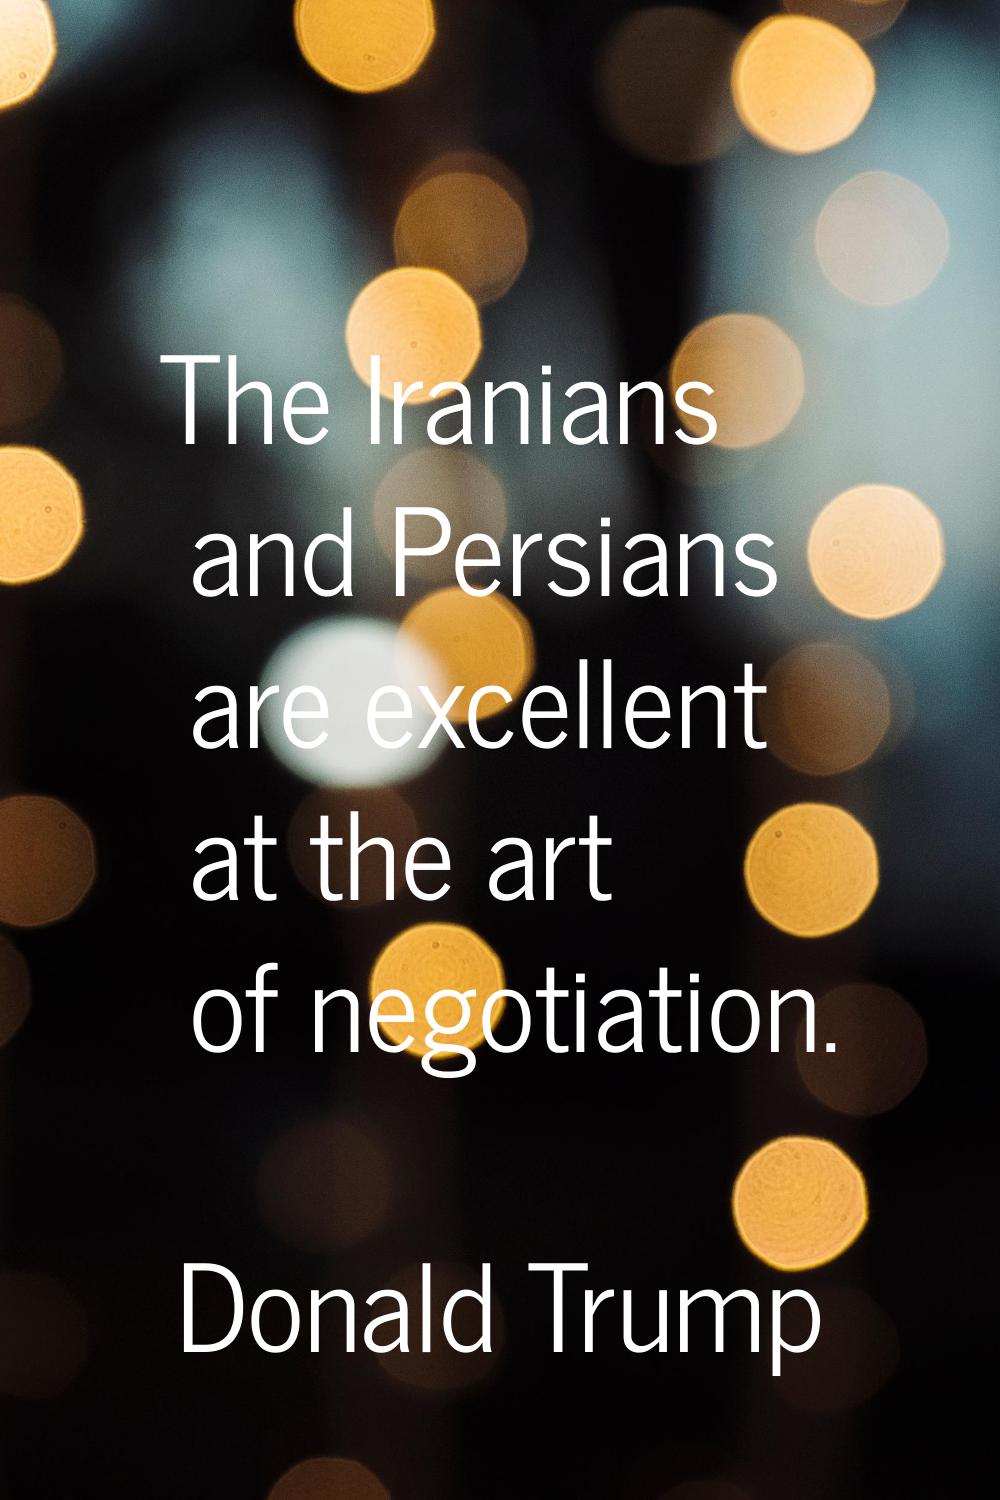 The Iranians and Persians are excellent at the art of negotiation.